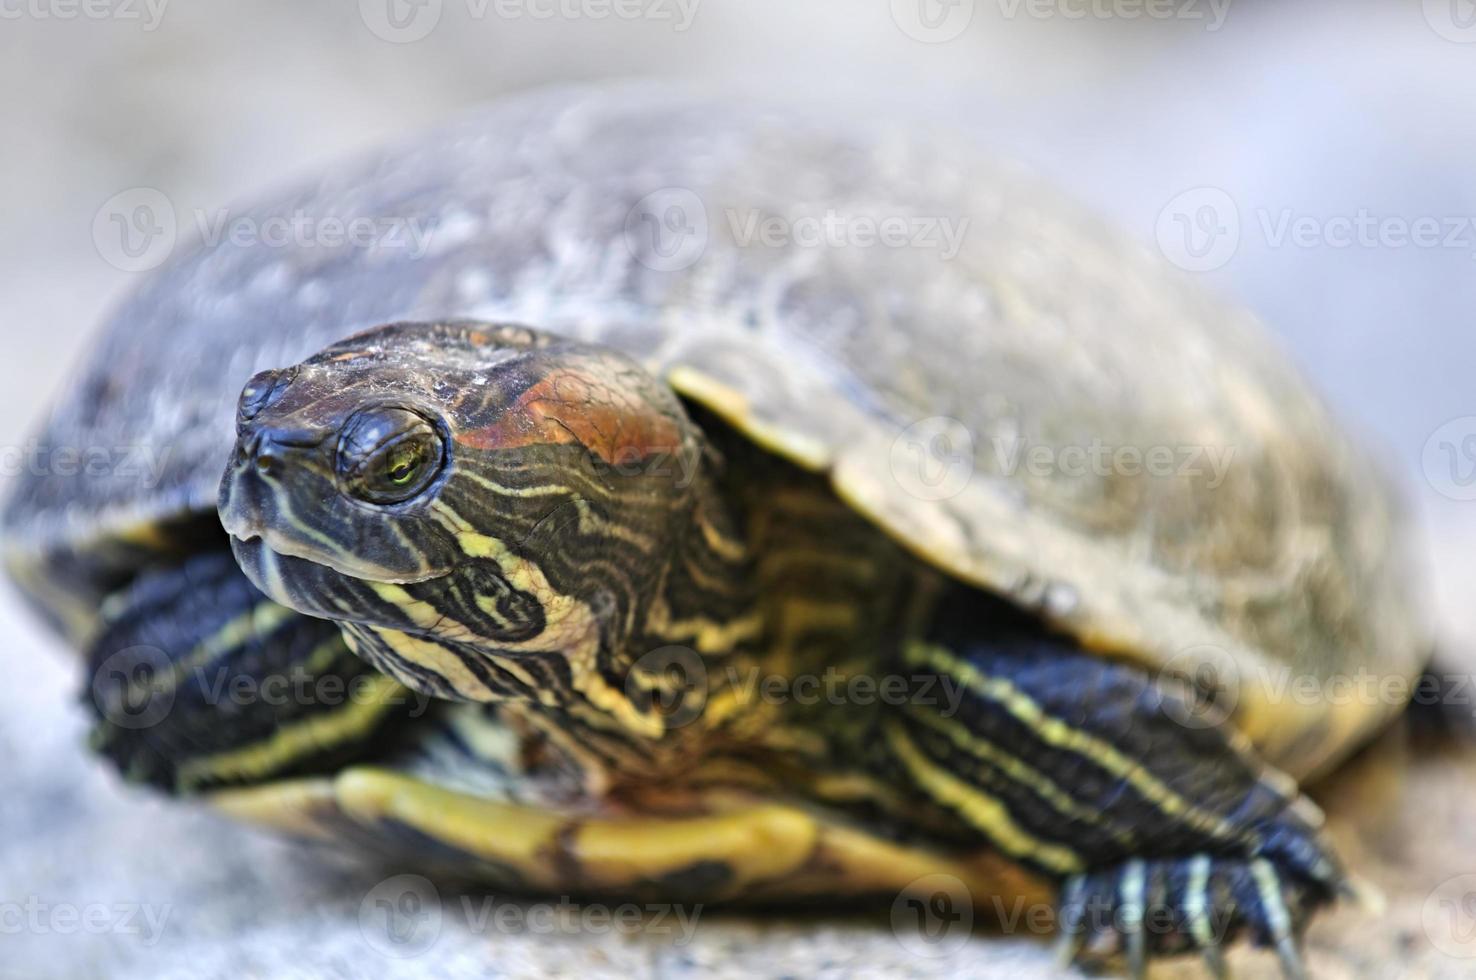 Red eared slider turtle photo